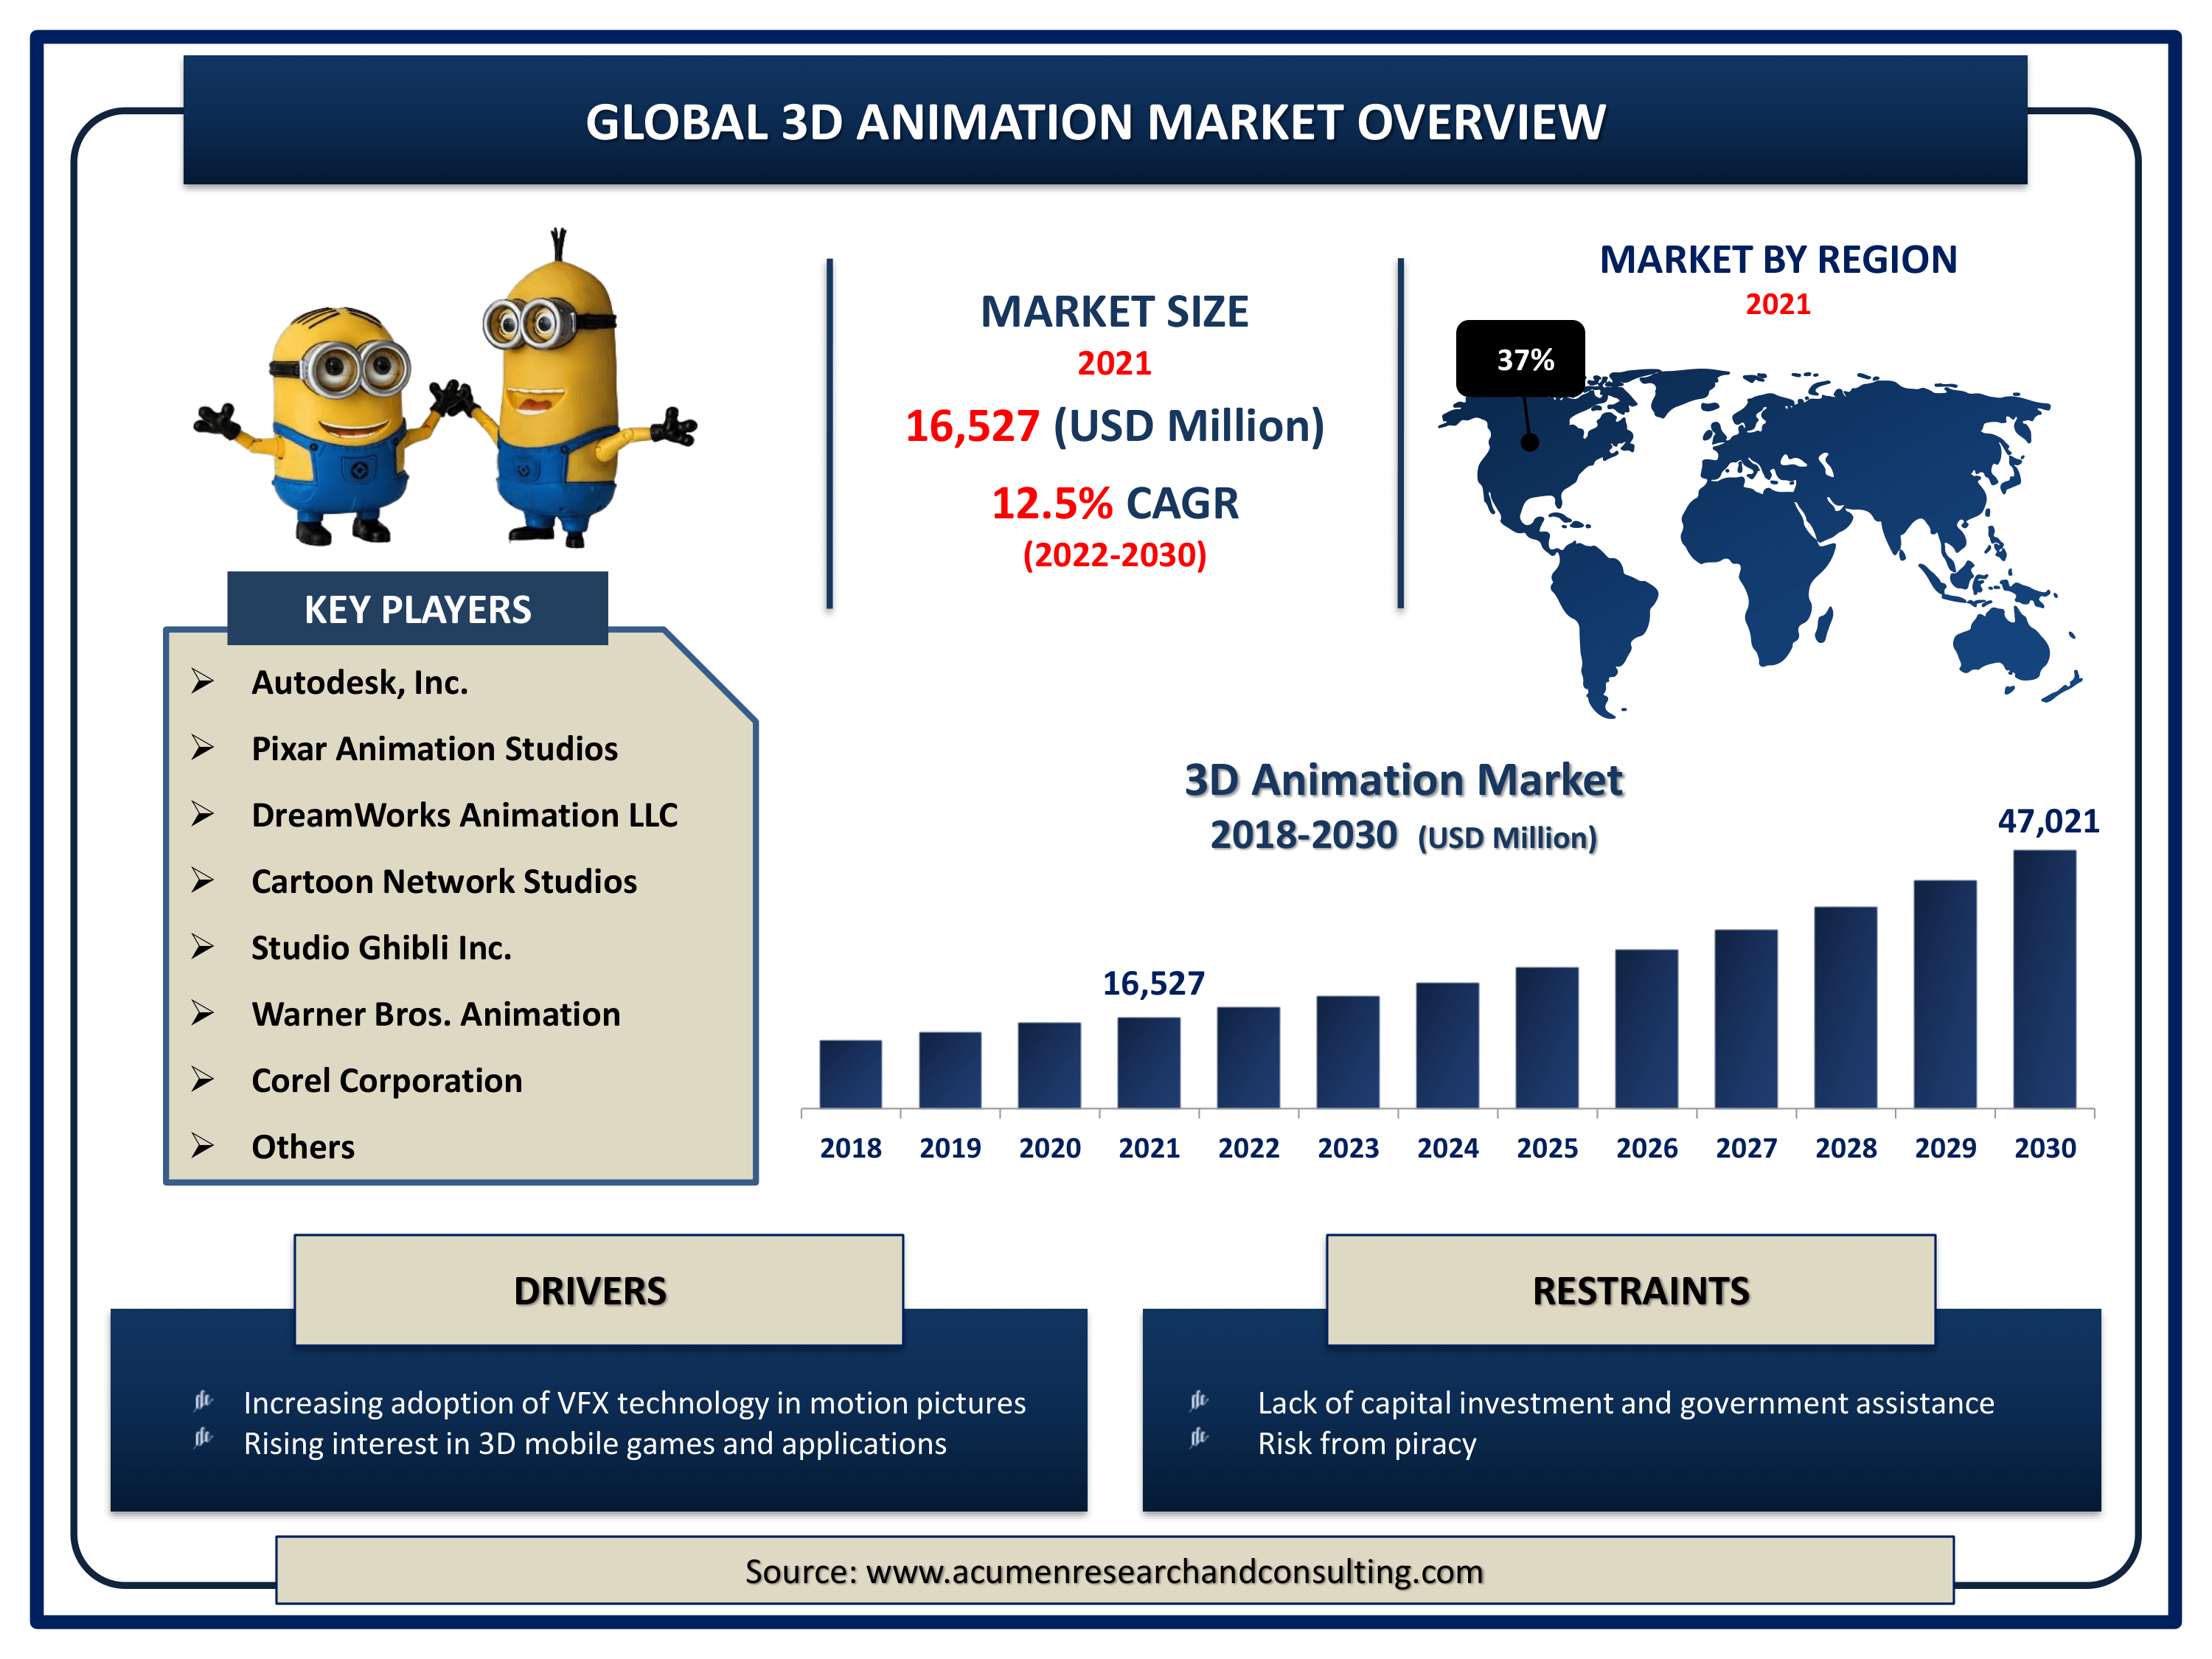 Global 3D animation market revenue intended to gain USD 47,021 million by 2030 with a CAGR of 12.5% from 2022 to 2030